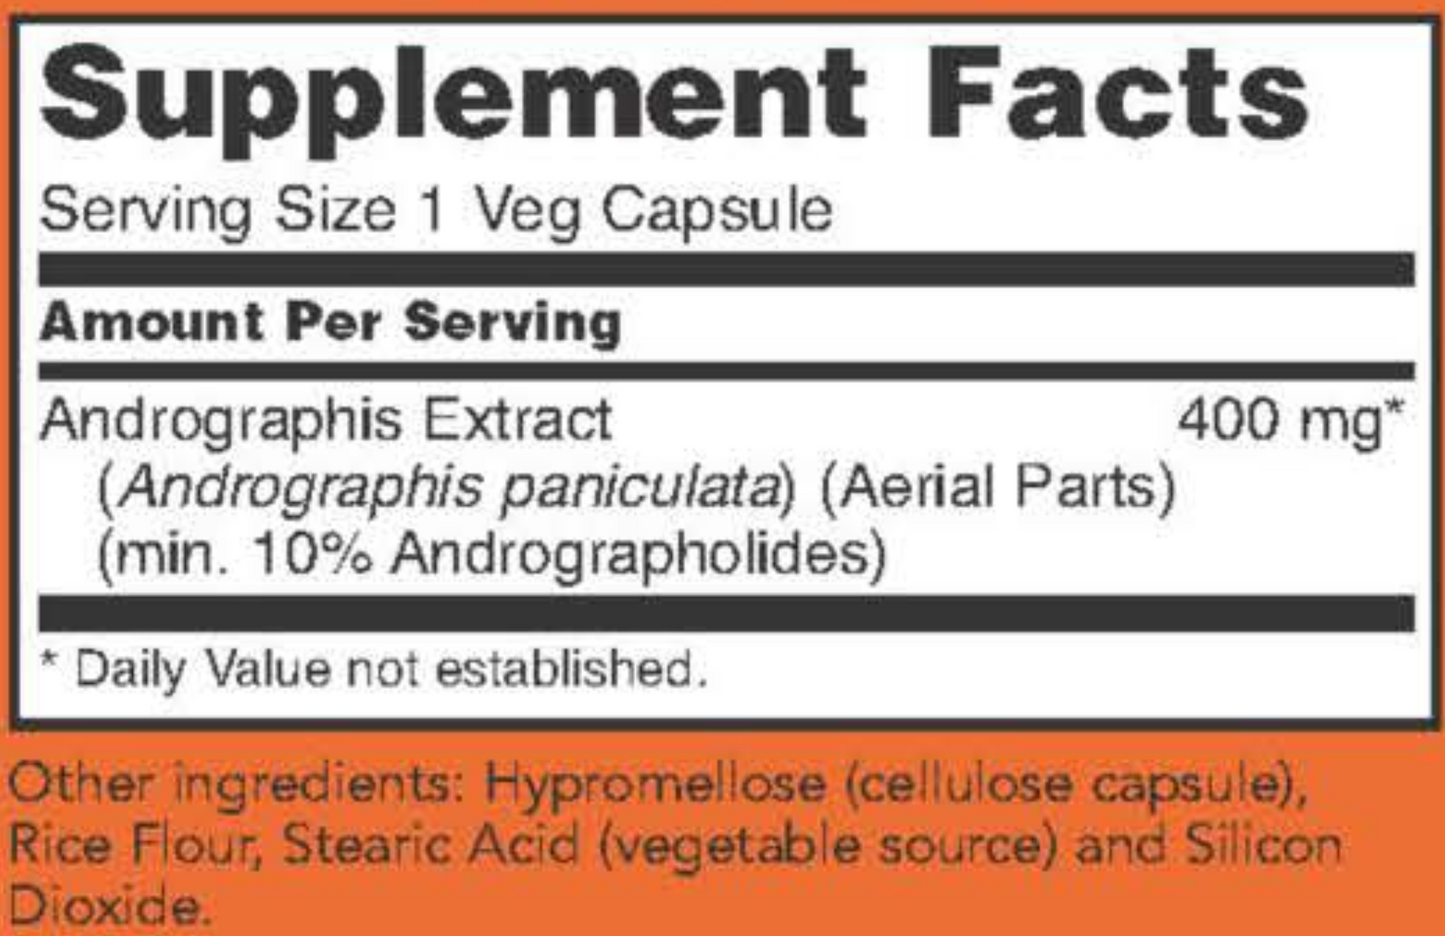 Andrographis Extract 400 mg 90 vegcaps NOW